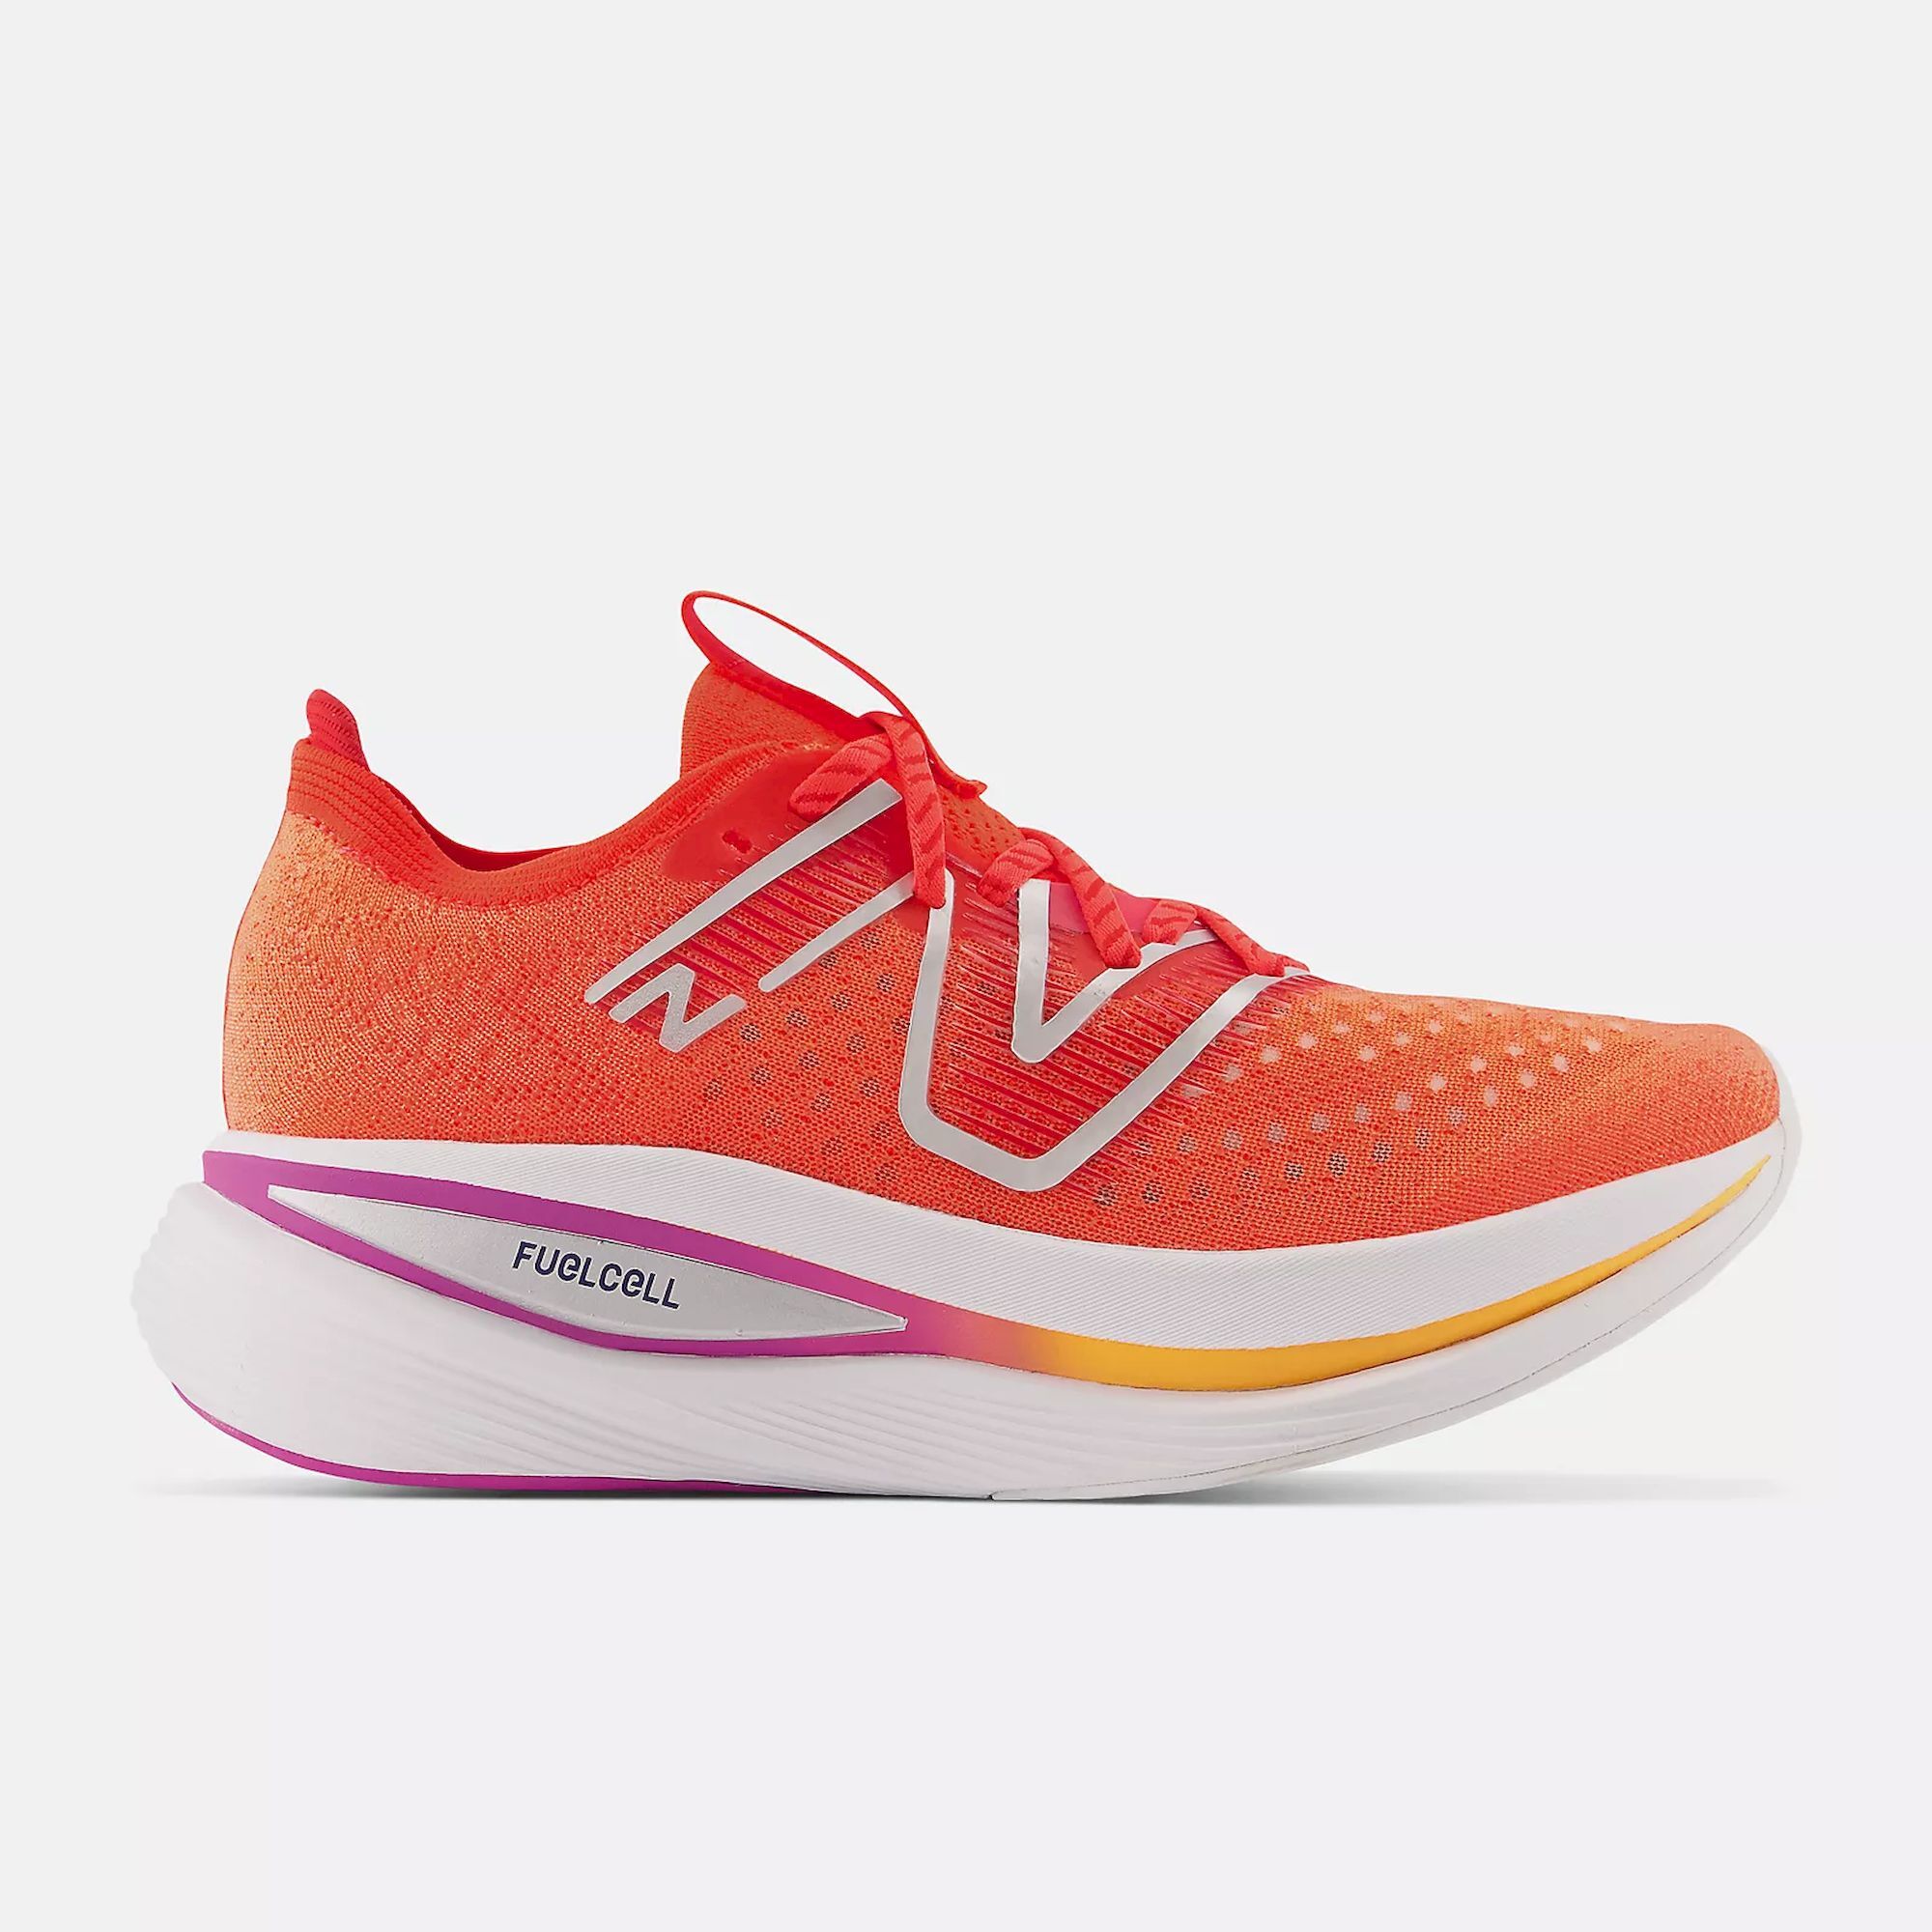 New Balance Fuelcell SC Trainer V2 - Buty do biegania damskie | Hardloop